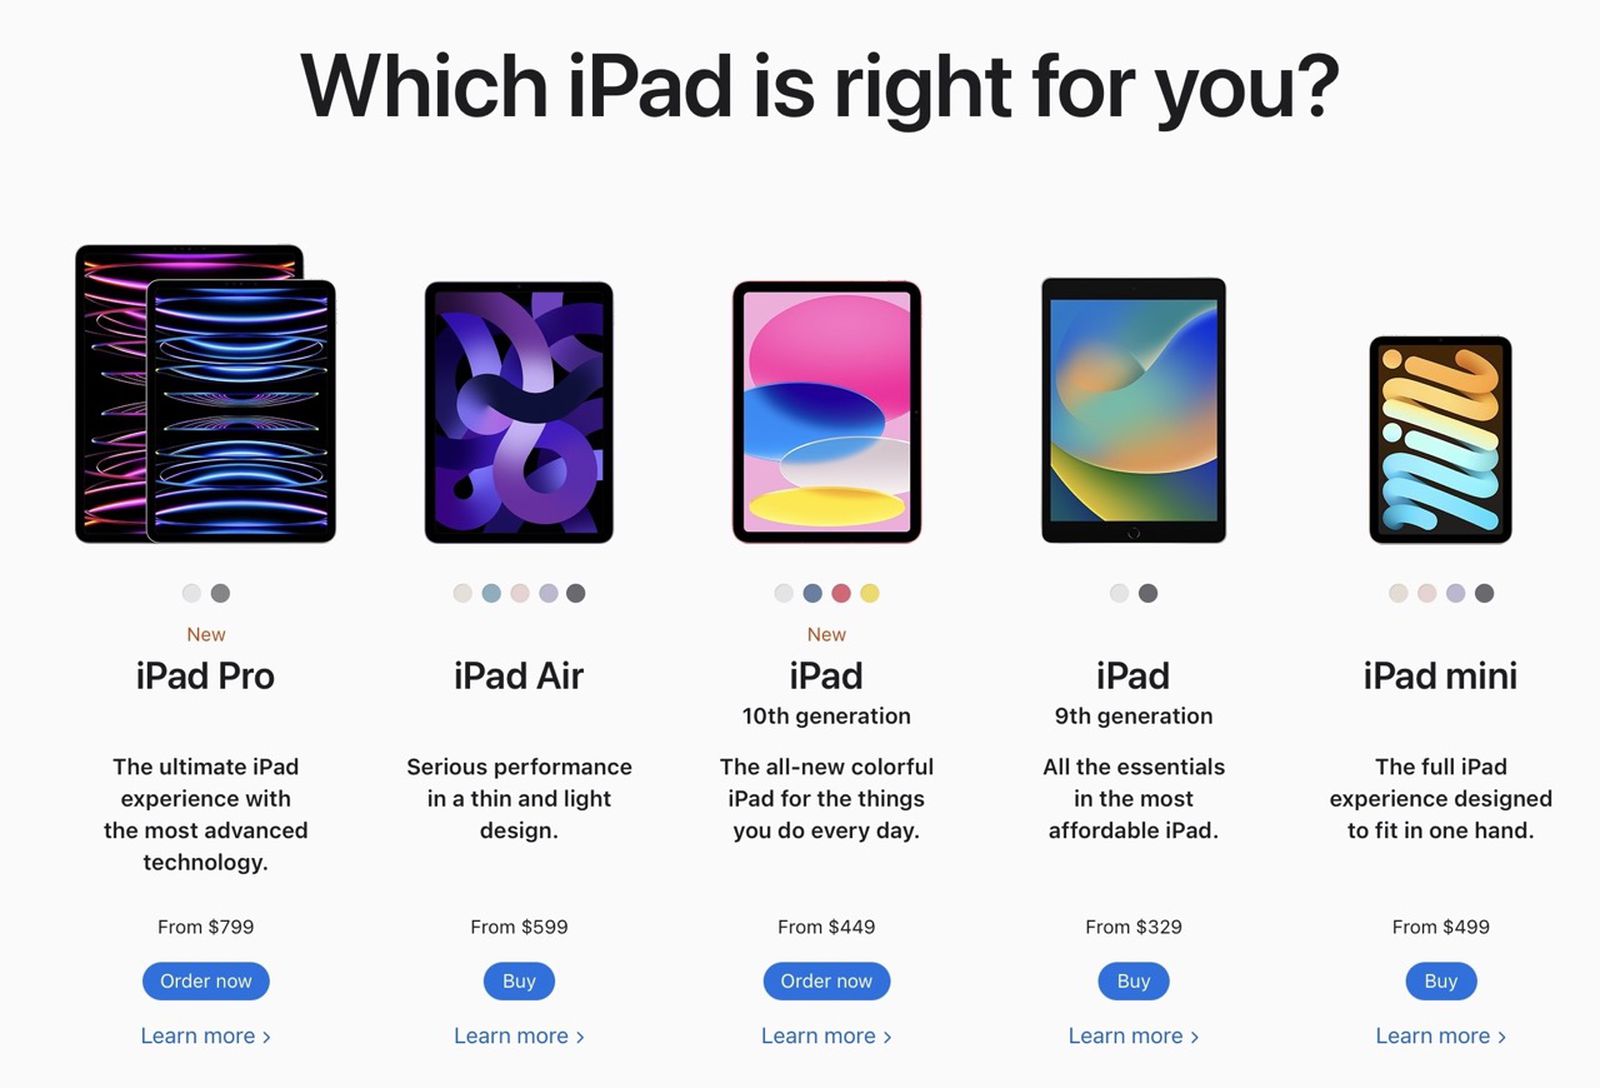 Apple's New iPad Lineup Causes Potential Confusion With Inconsistent